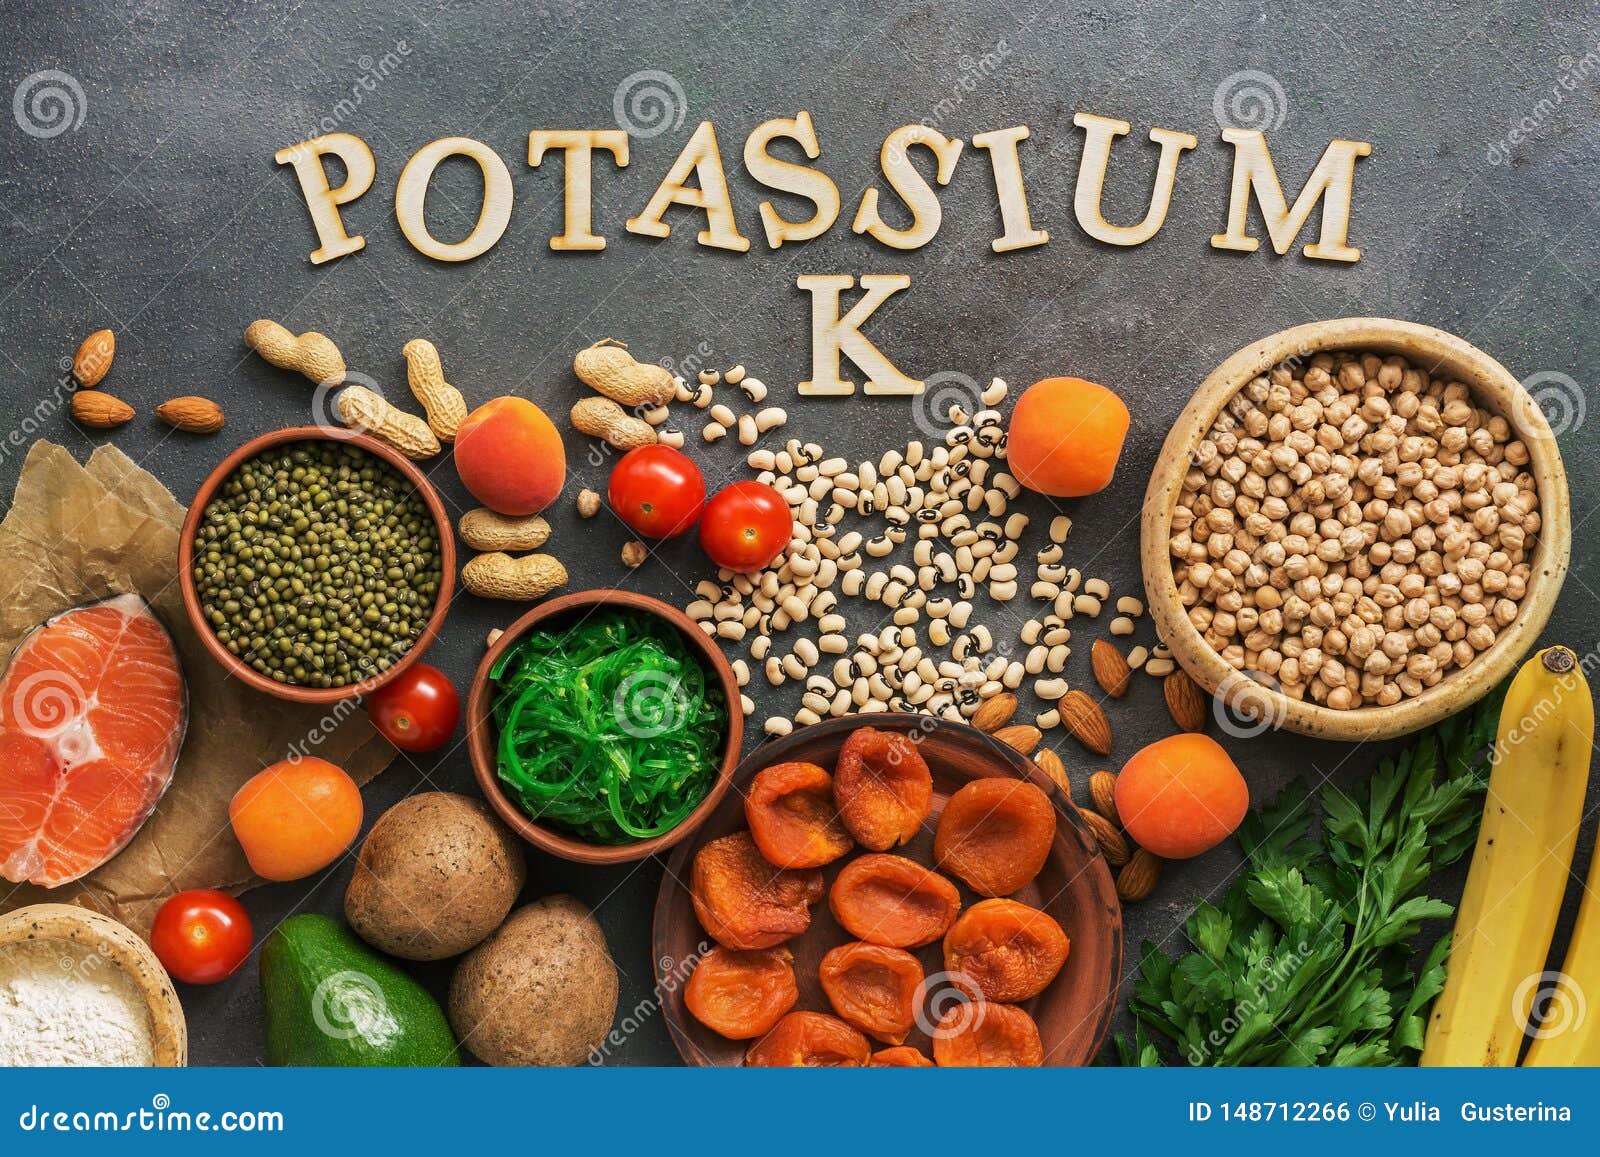 foods rich in potassium, salmon, legumes, vegetables, fruits on a dark background. healthy food concept,avitaminosis prevention.